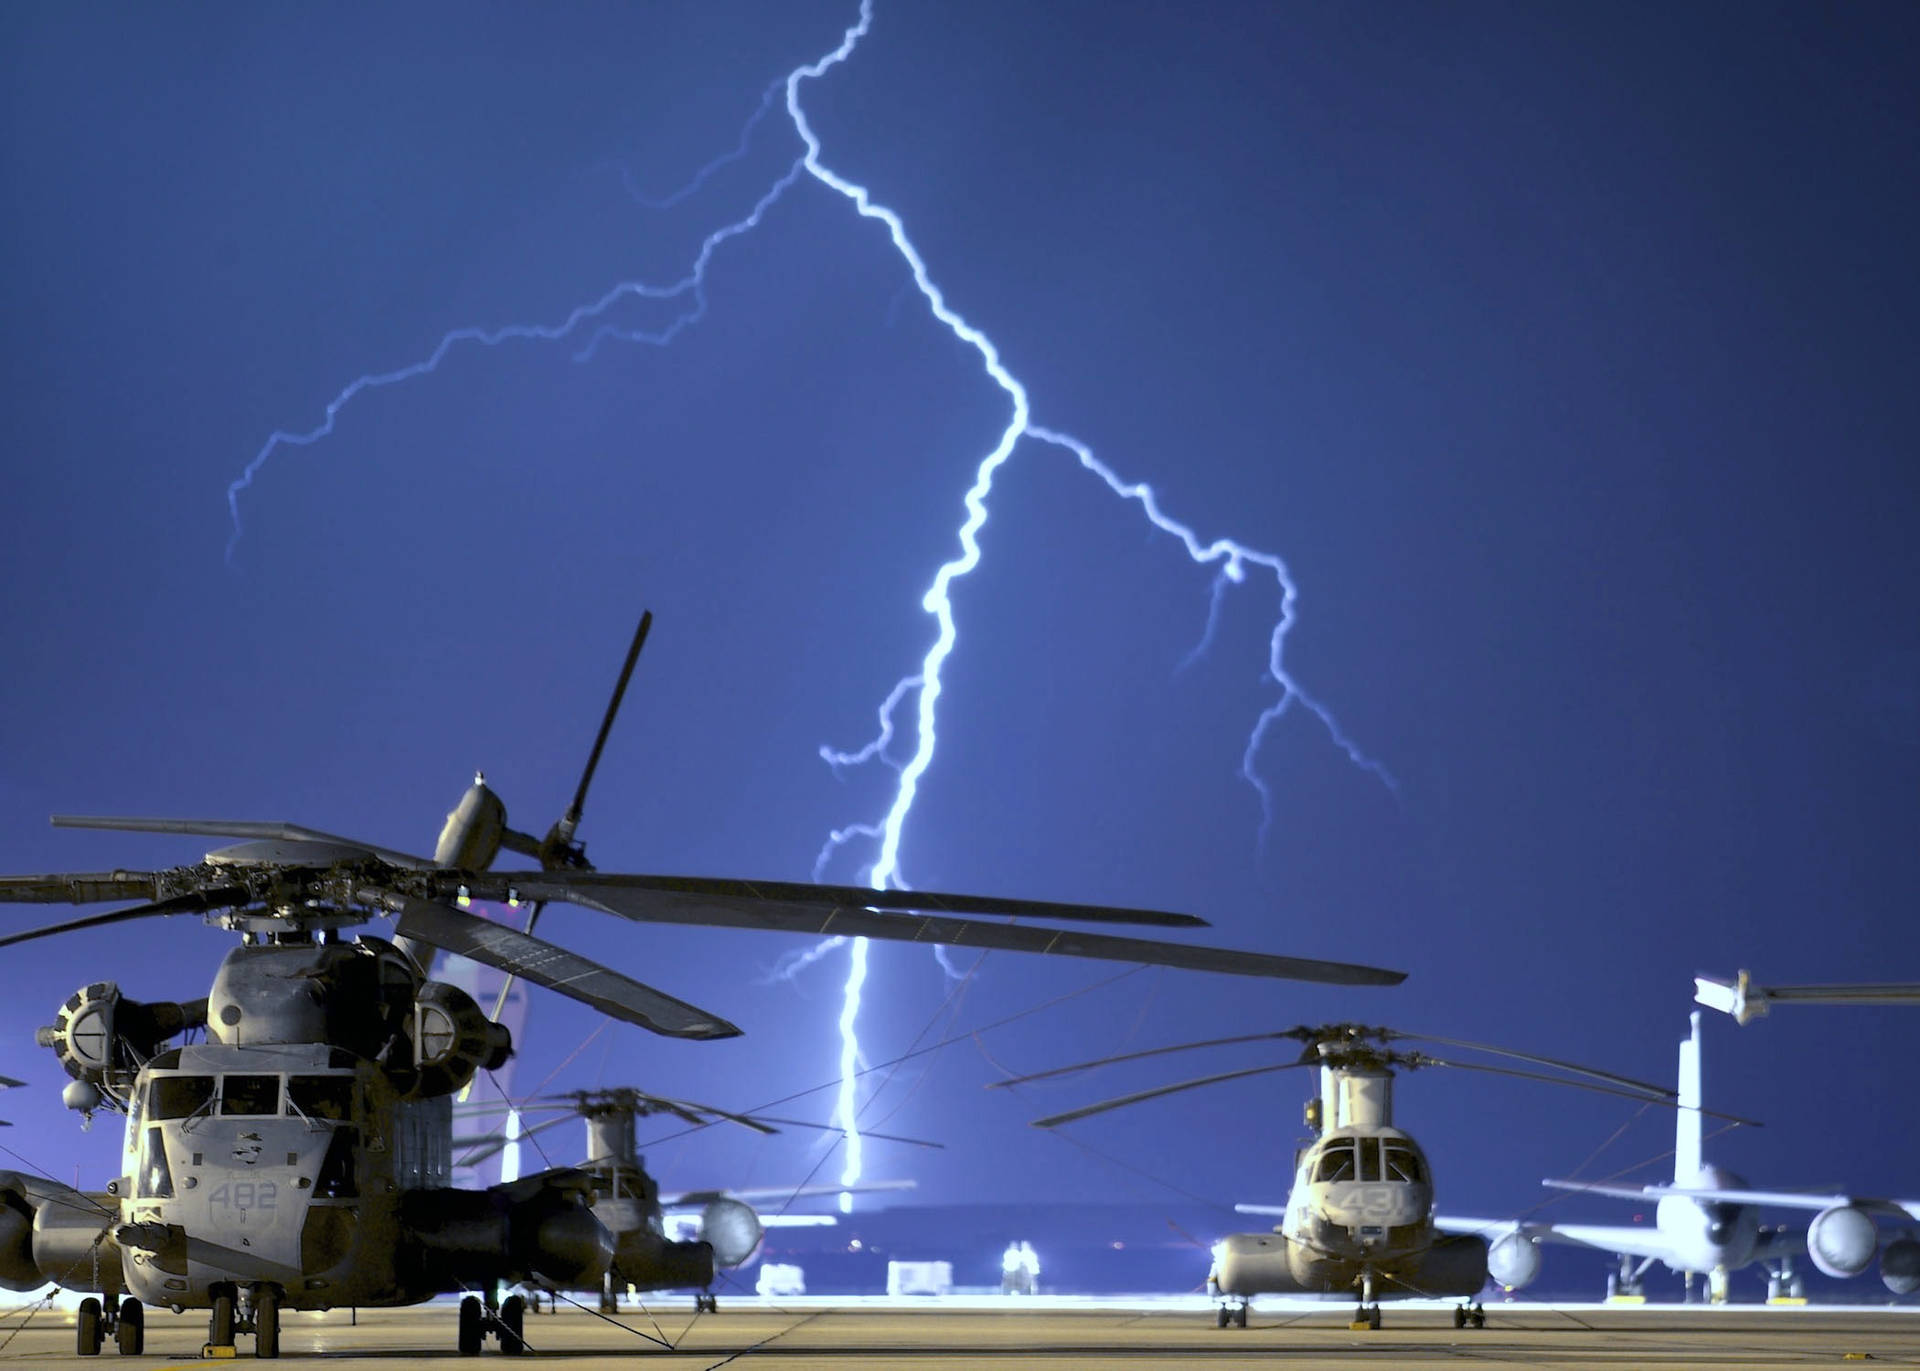 Military Helicopter And Lightning Strike Wallpaper